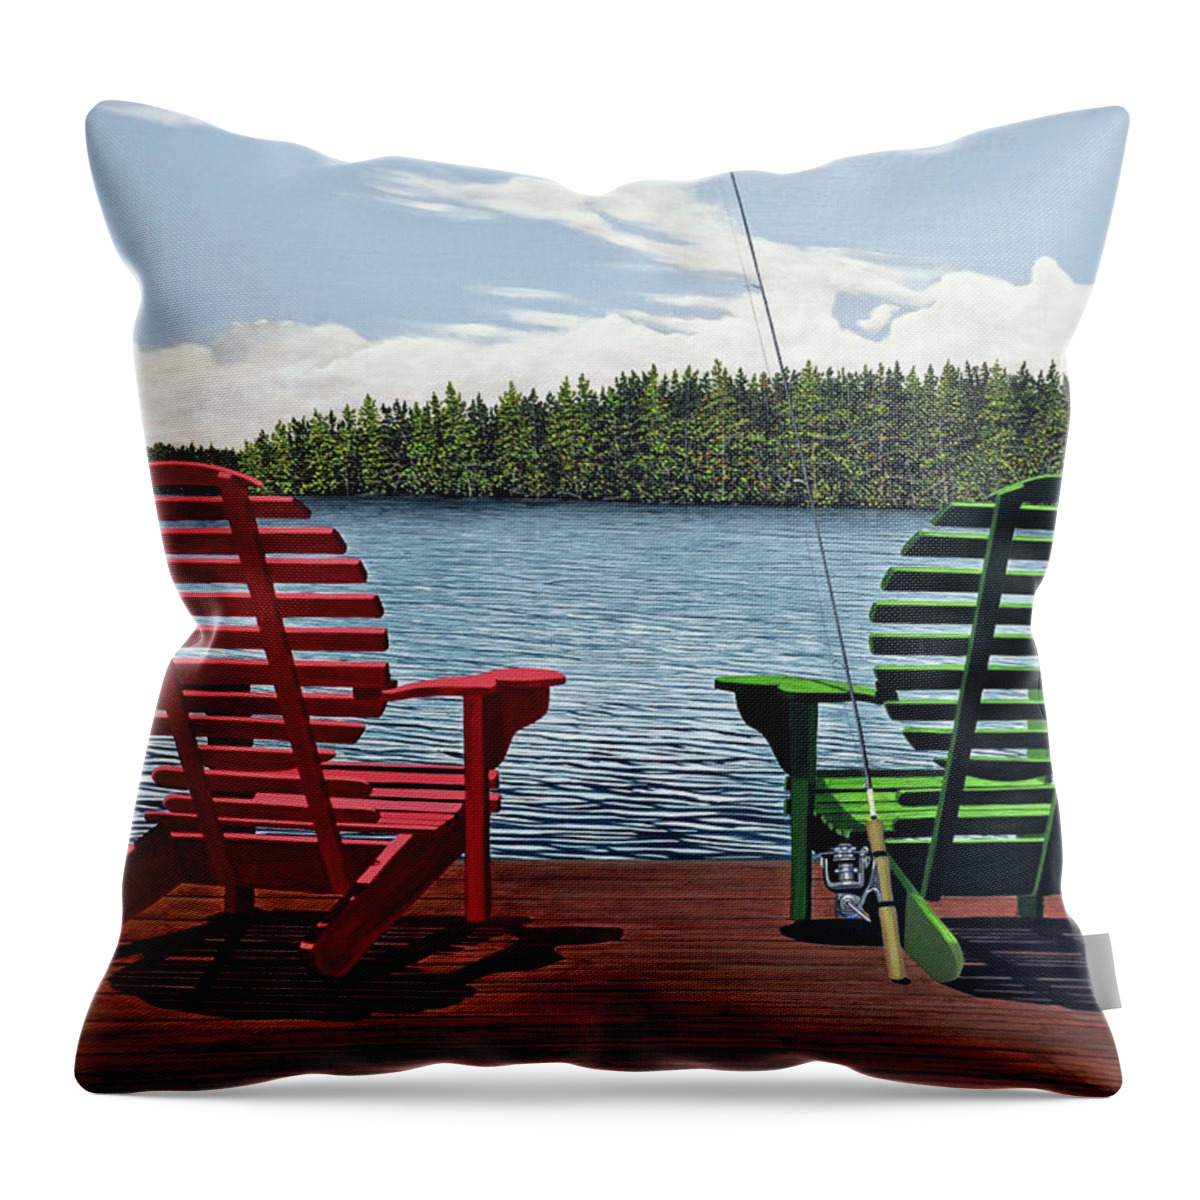 Landscapes Throw Pillow featuring the painting Dockside by Kenneth M Kirsch